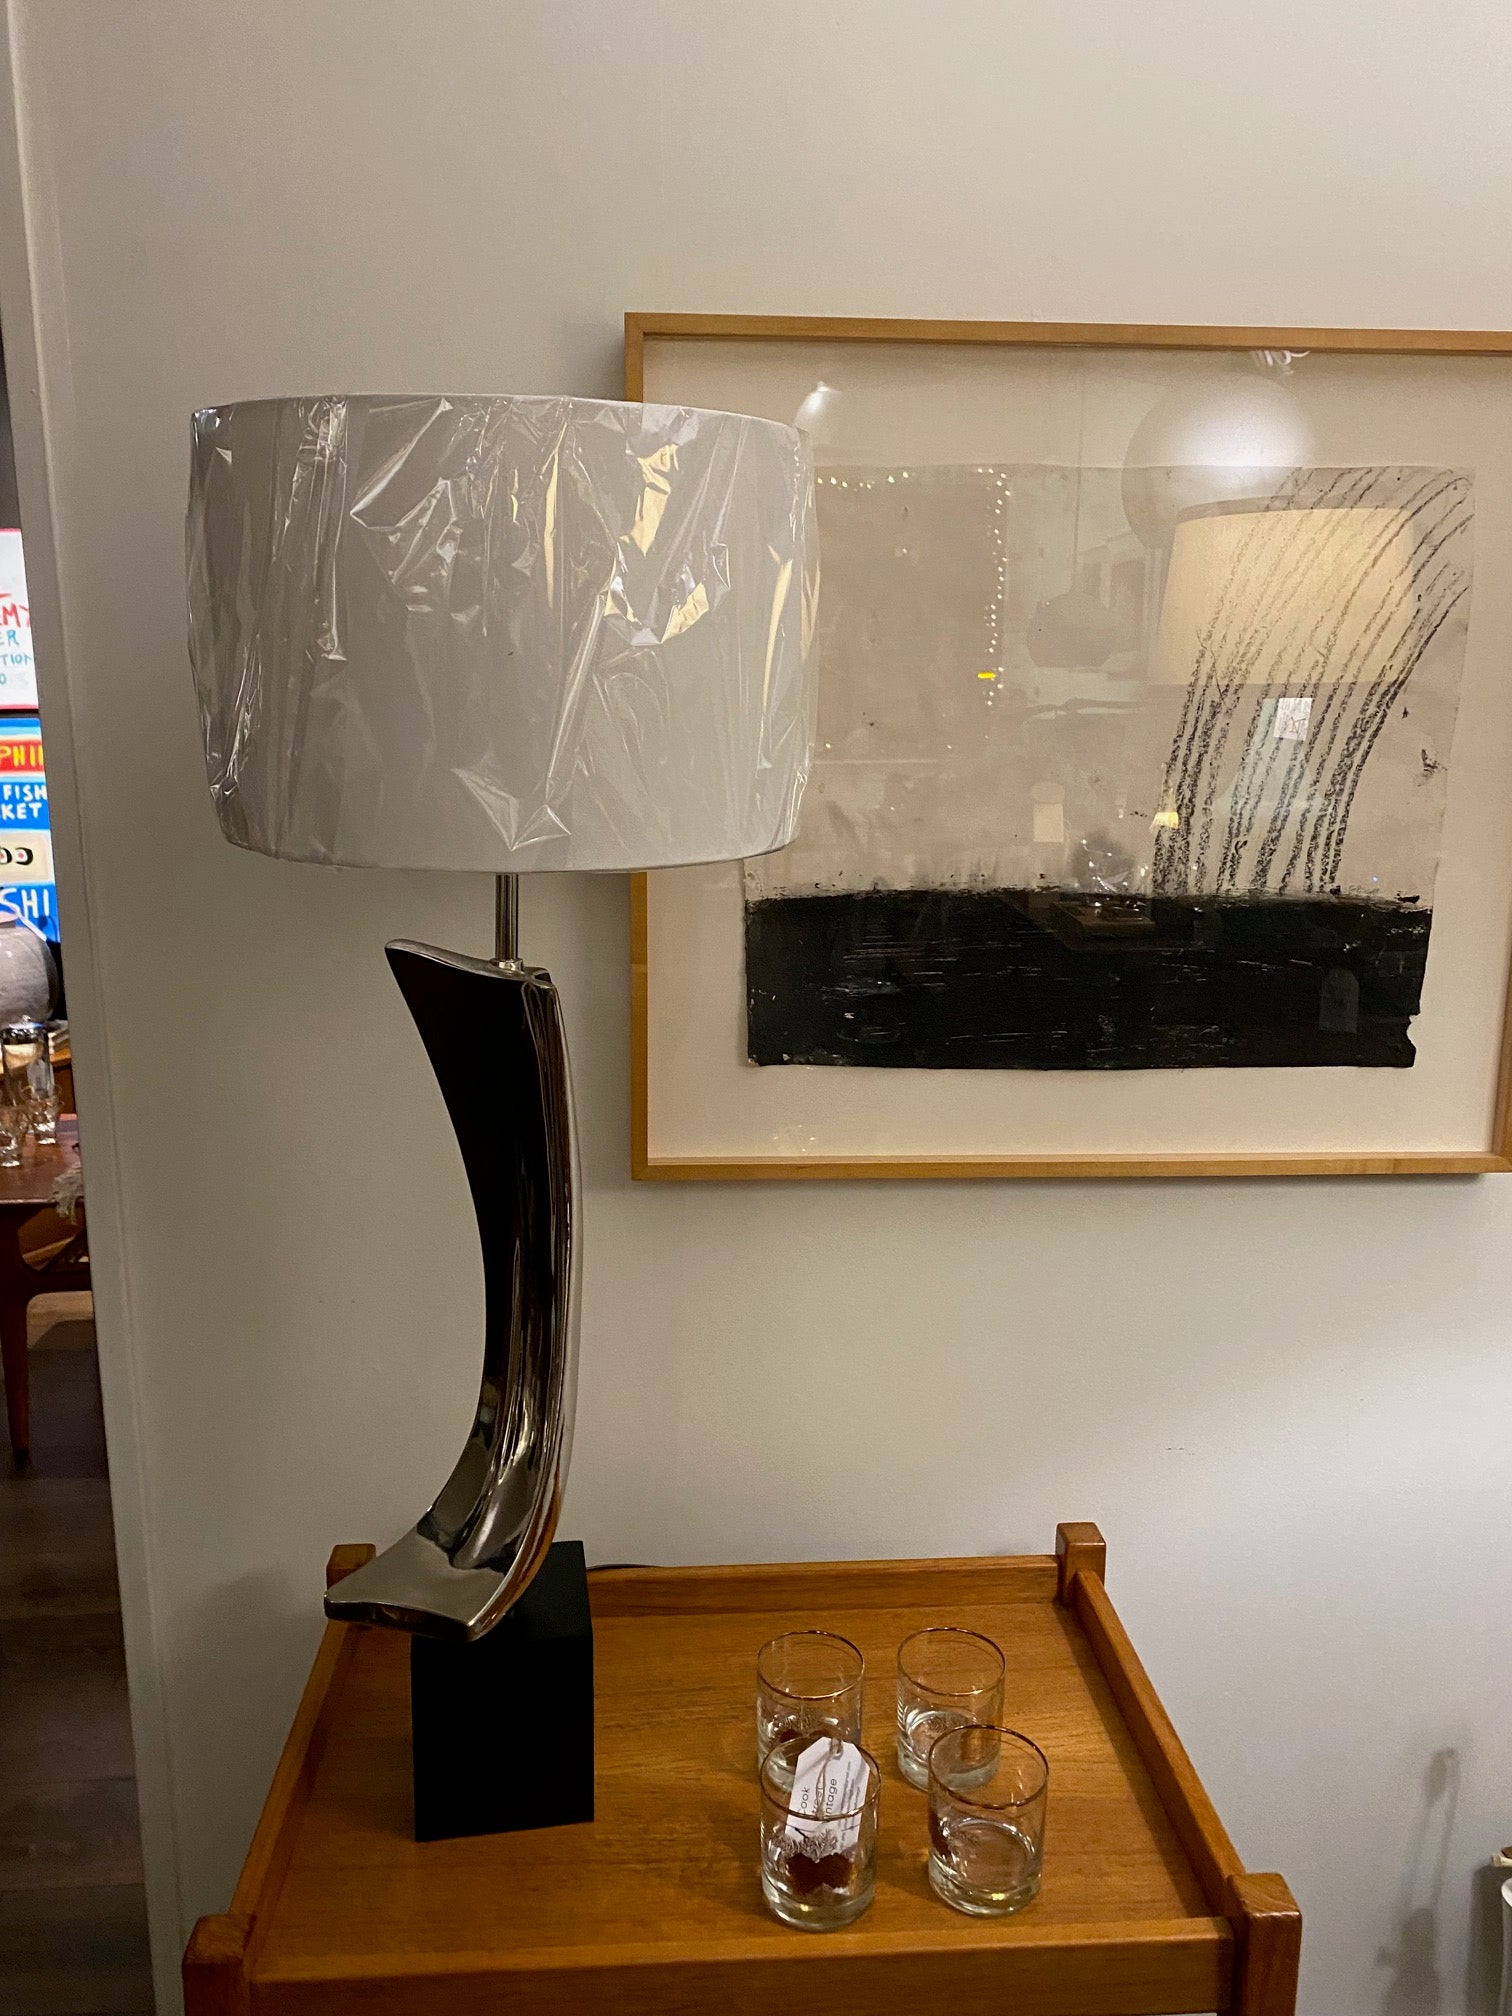 Incredible Laurel Table Lamp by Harold Weiss And Richard Barr. Black base with chrome. Designed by Harold Weiss and Richard Barr Laurel Lamp Company shown on a teak bar cart with a mixed media by Gary Pearson, "Rainbow Effect" on the wall- Cook Street Vintage